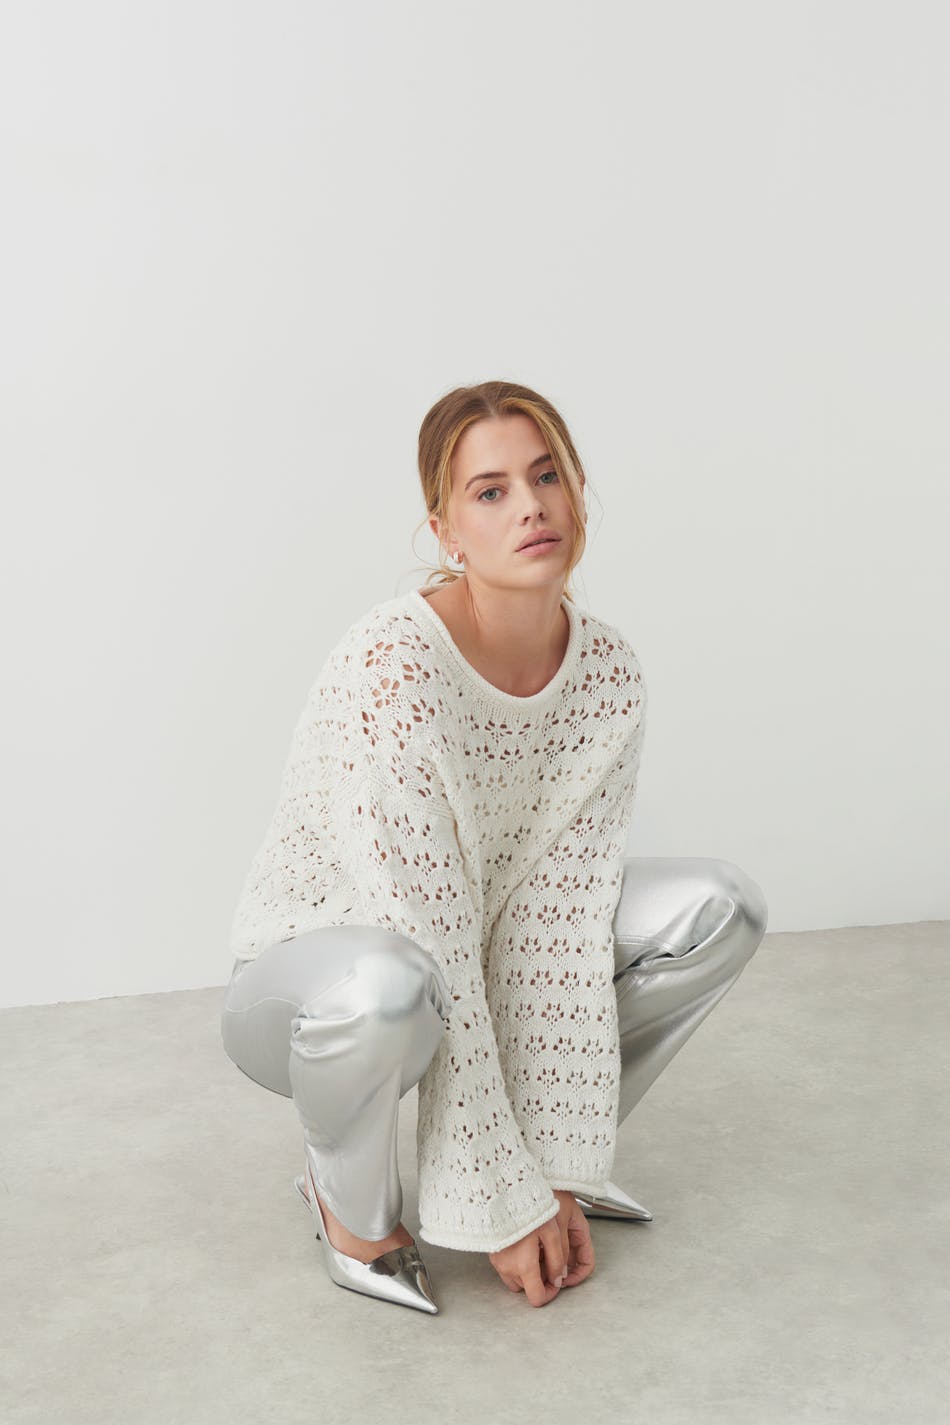 Knitted openwork sweater, Gina Tricot